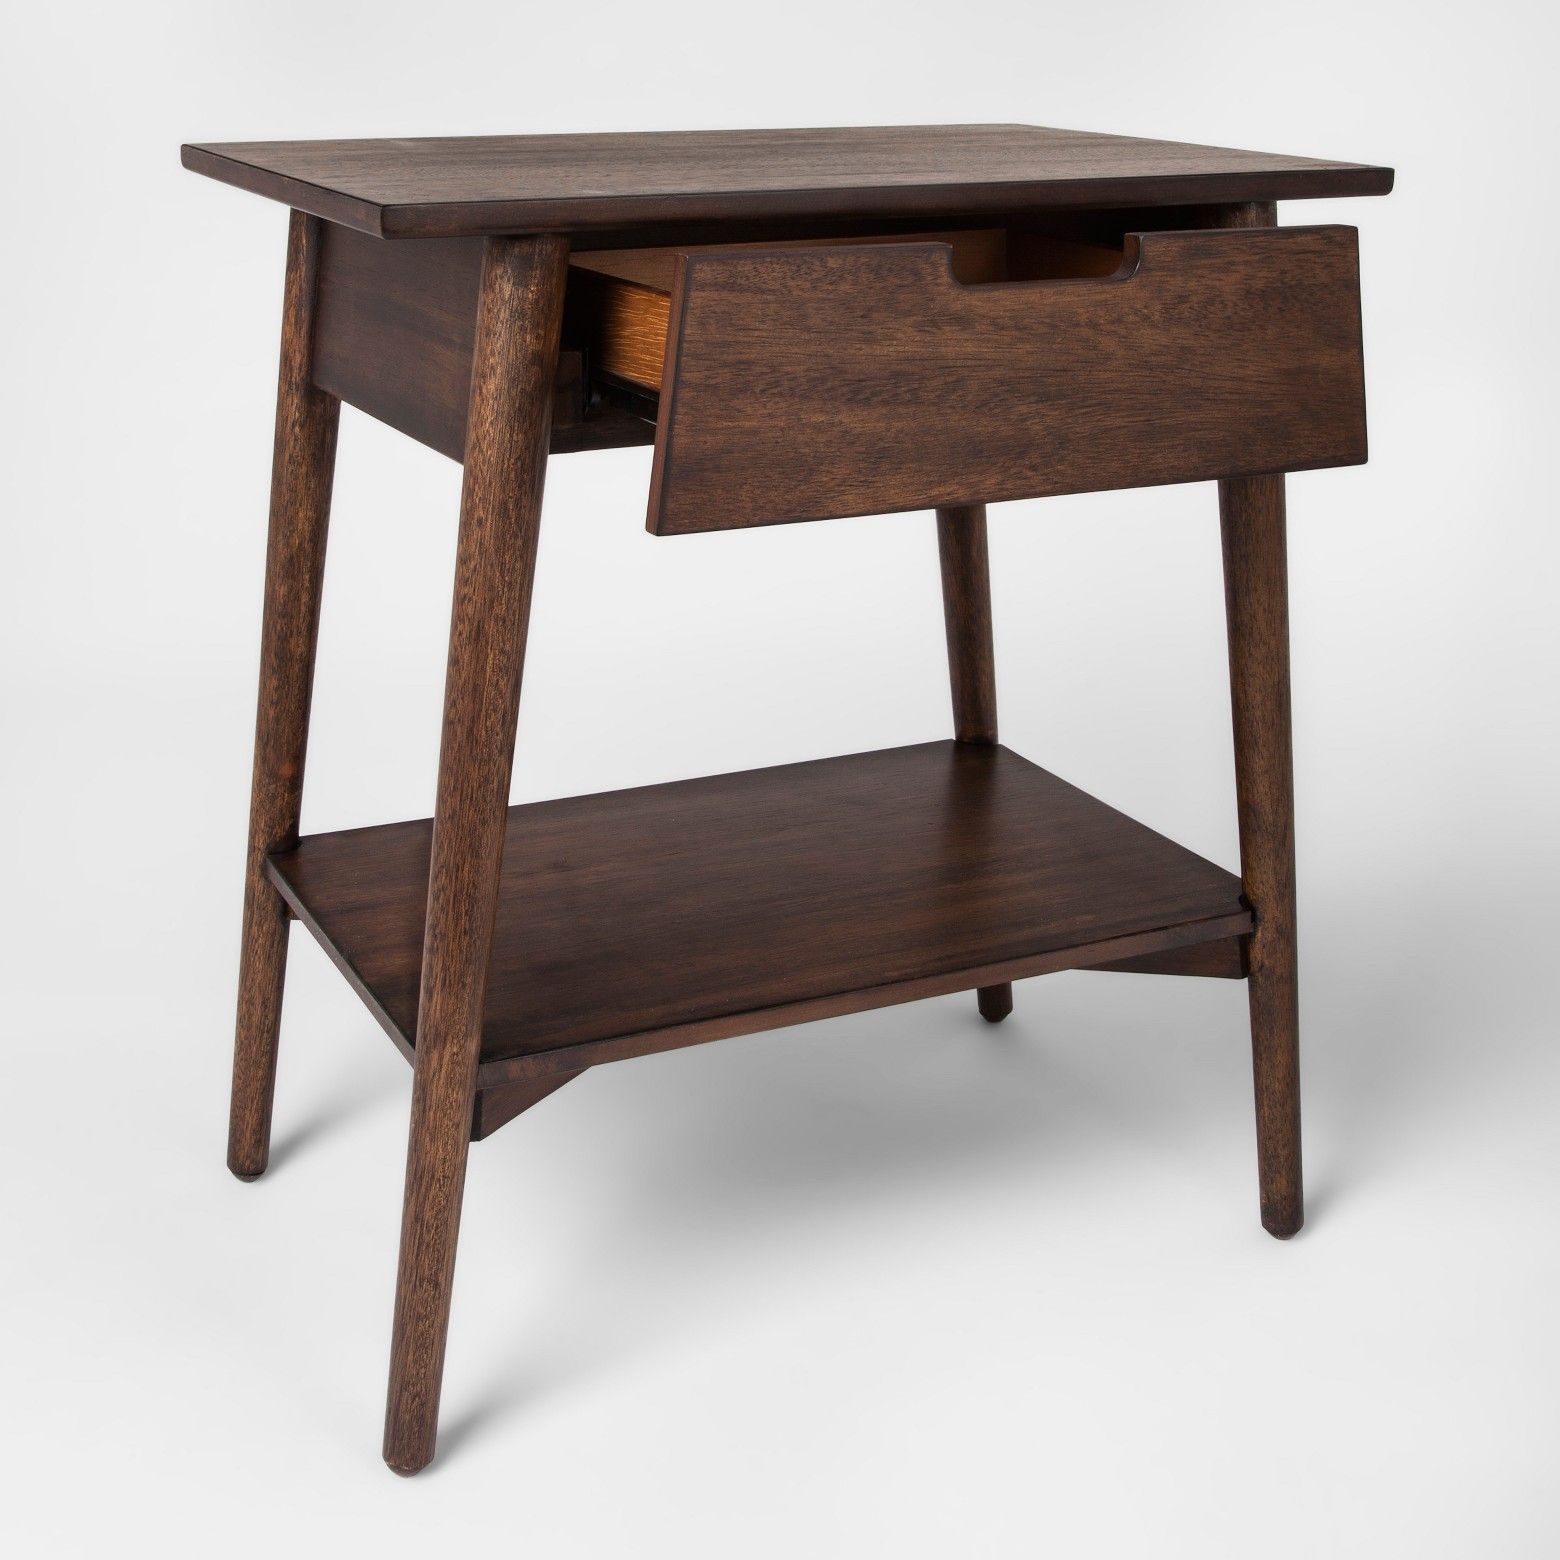 walnut one drawer accent table project furniture berwyn end metal and wood rustic brown threshold convertible small pine bookcase round linen tablecloths cabin style maple black